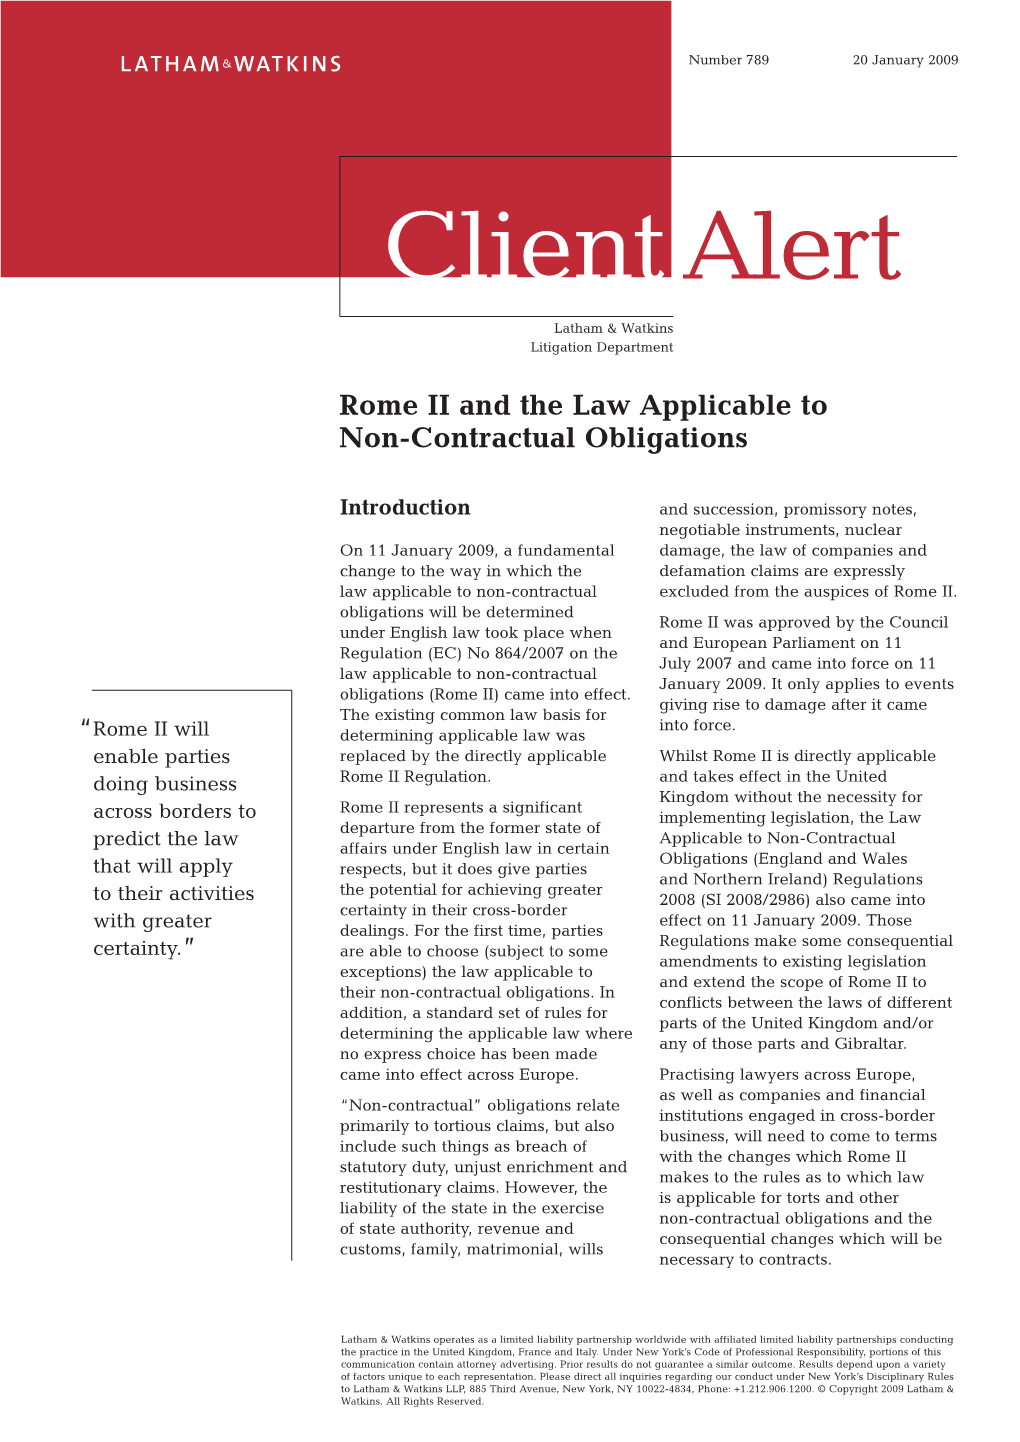 Rome II and the Law Applicable to Non-Contractual Obligations